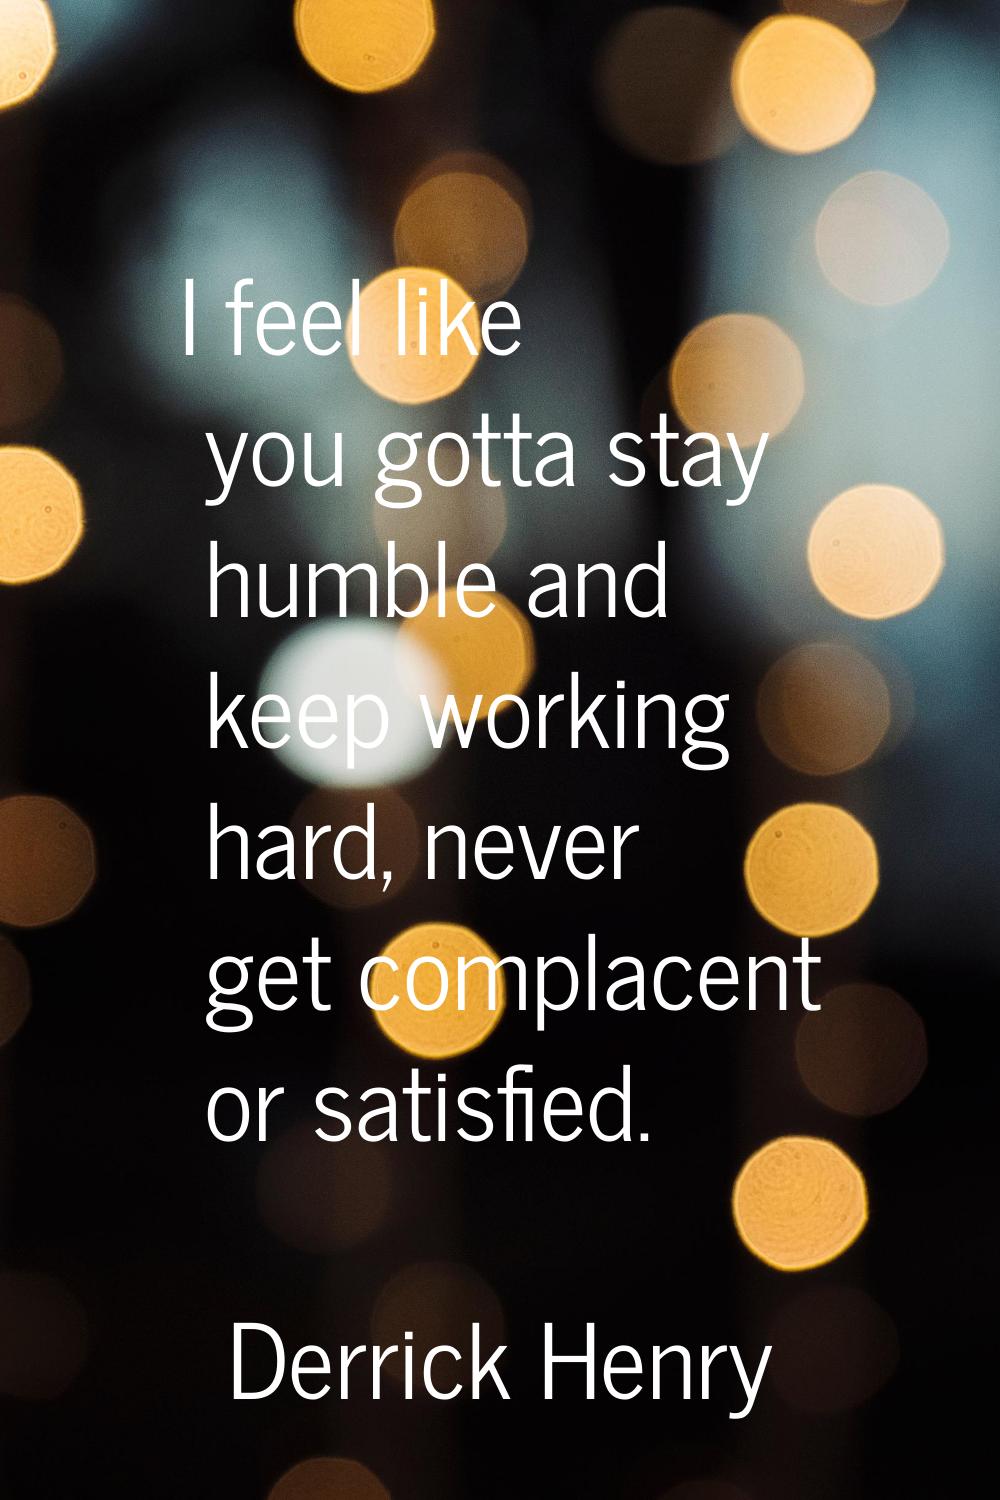 I feel like you gotta stay humble and keep working hard, never get complacent or satisfied.